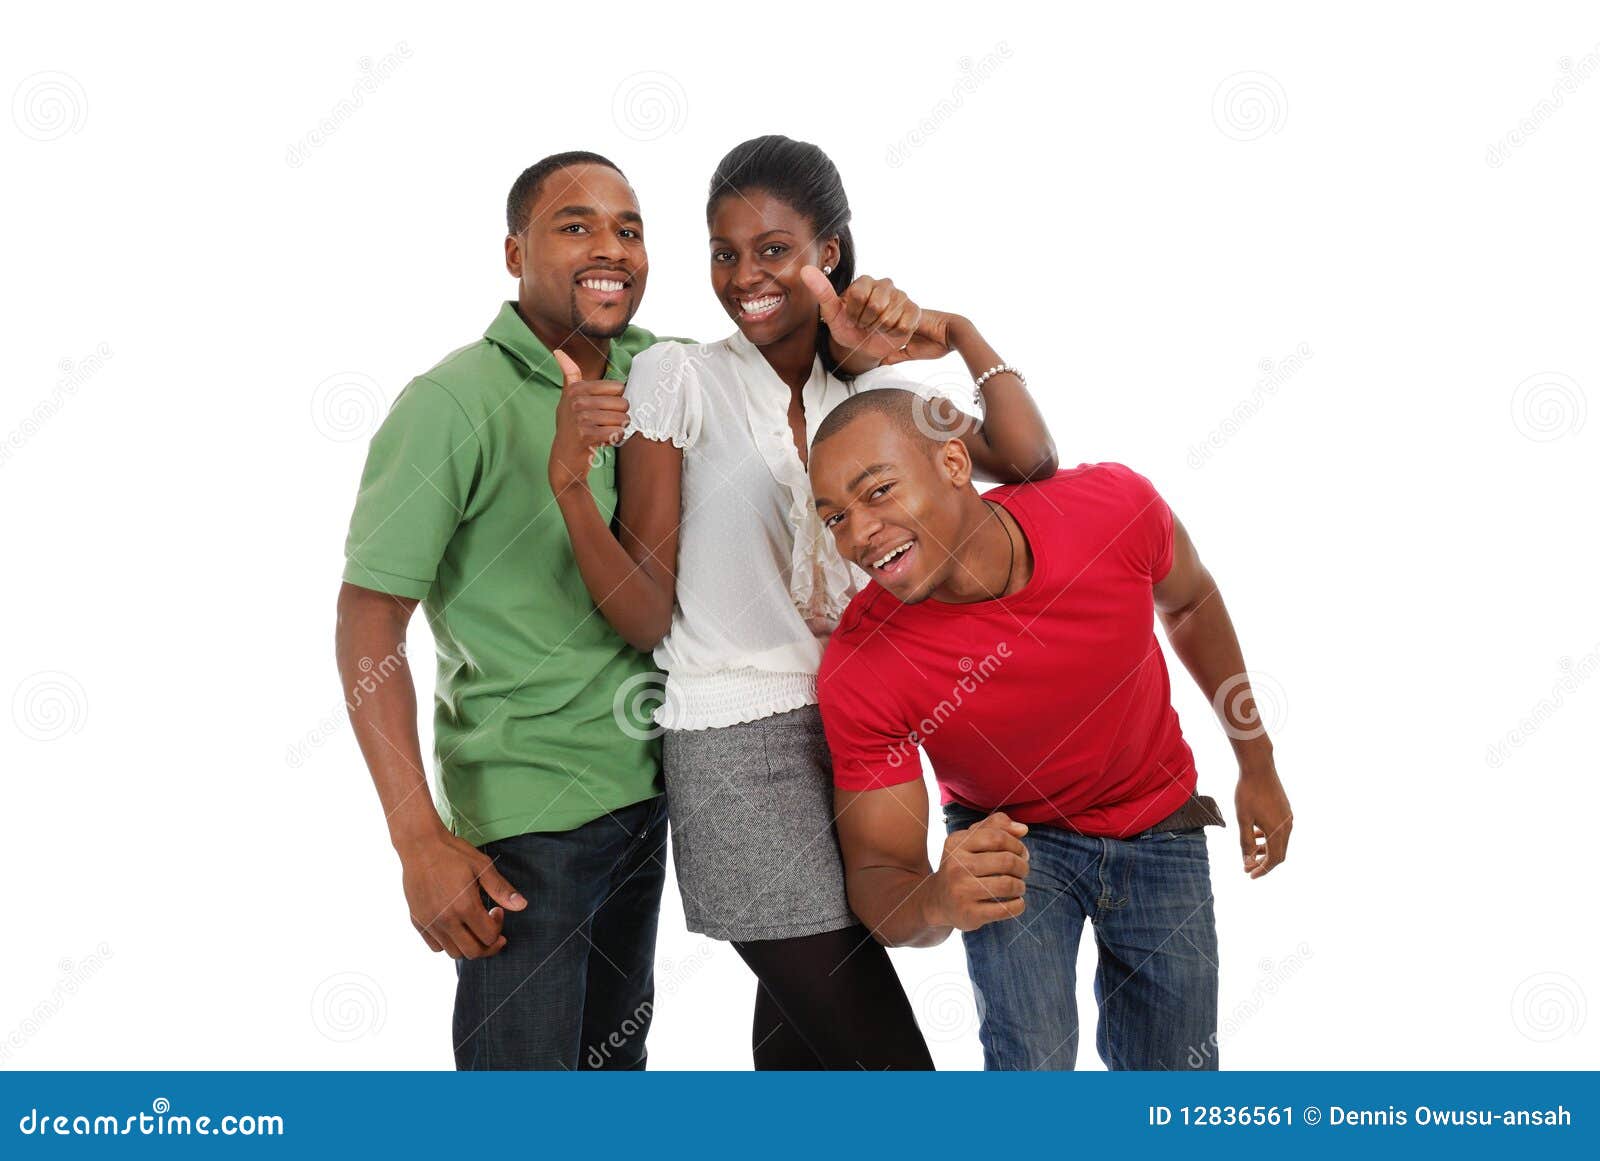 Happy young people stock image. Image of expression, jubilation - 12836561